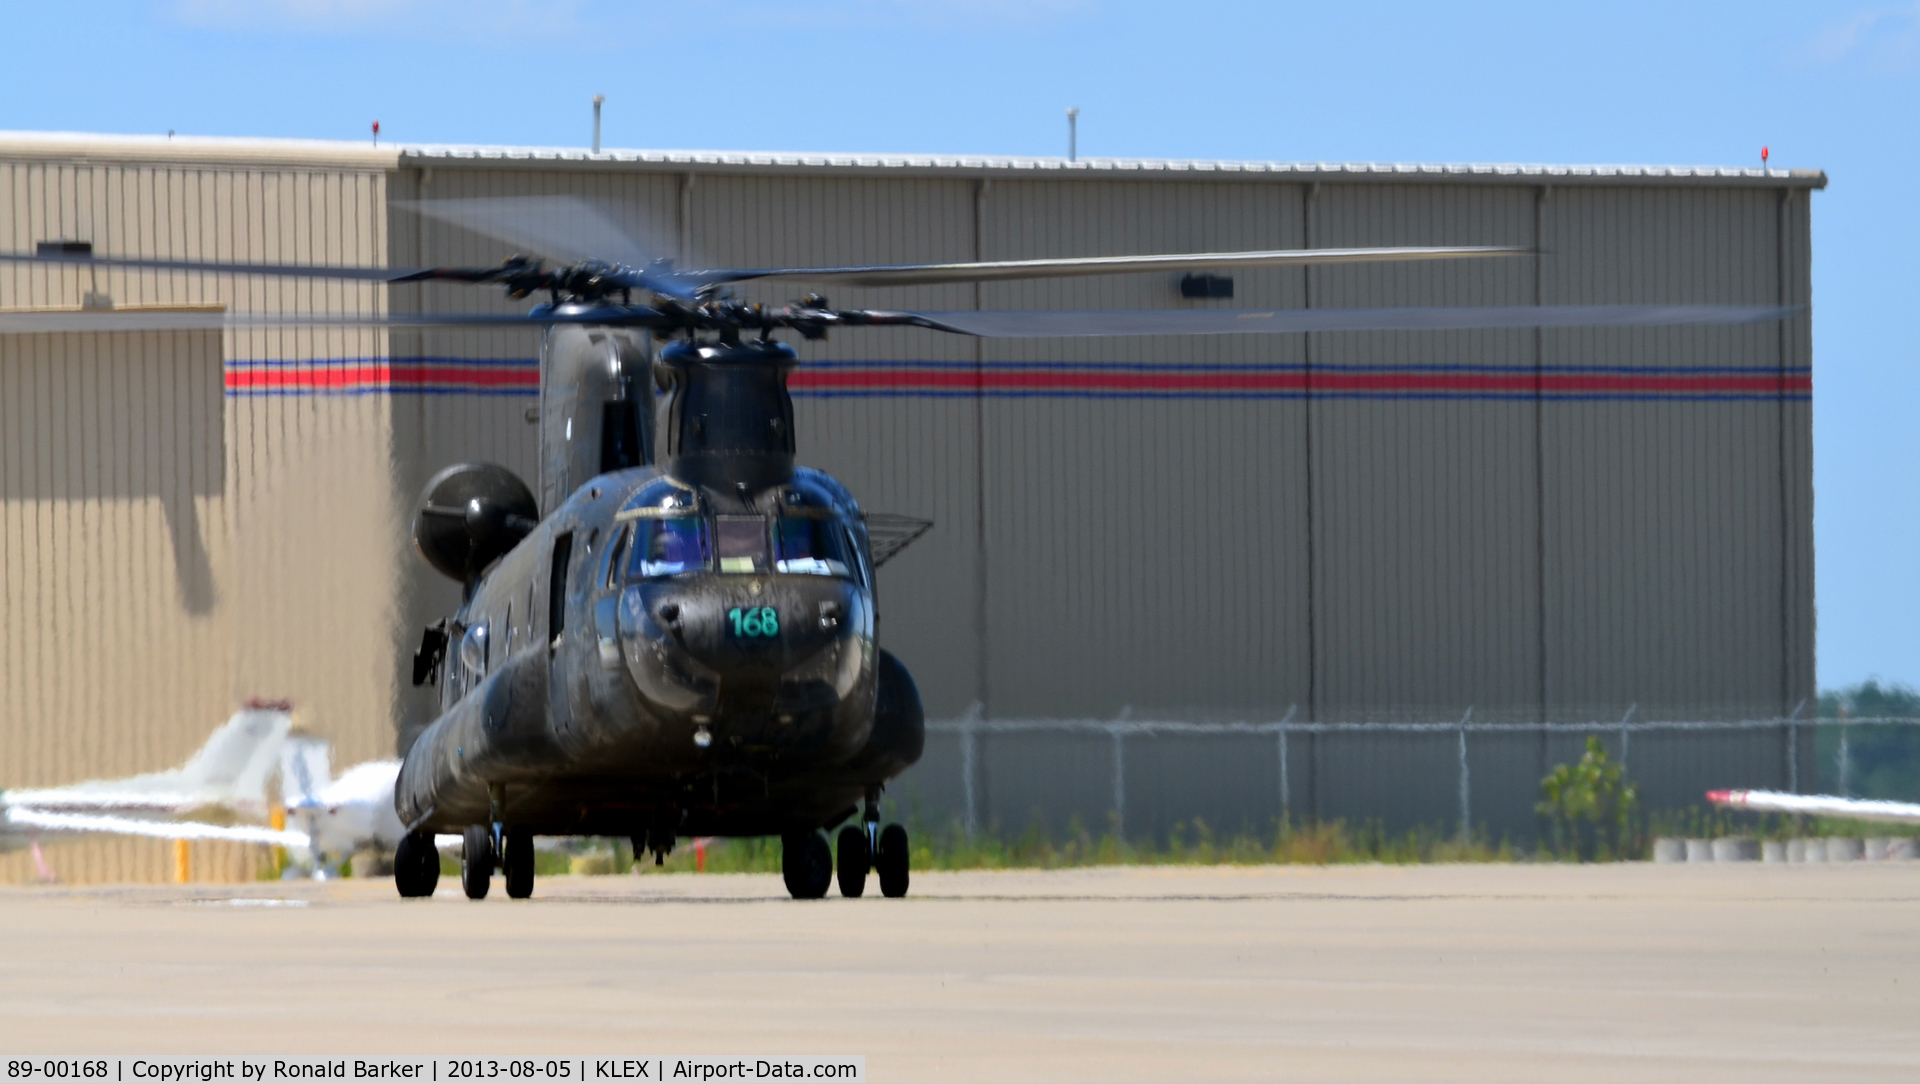 89-00168, 1989 Boeing Vertol CH-47D Chinook C/N M.3322, Former 70-15027  Taxi for takeoff